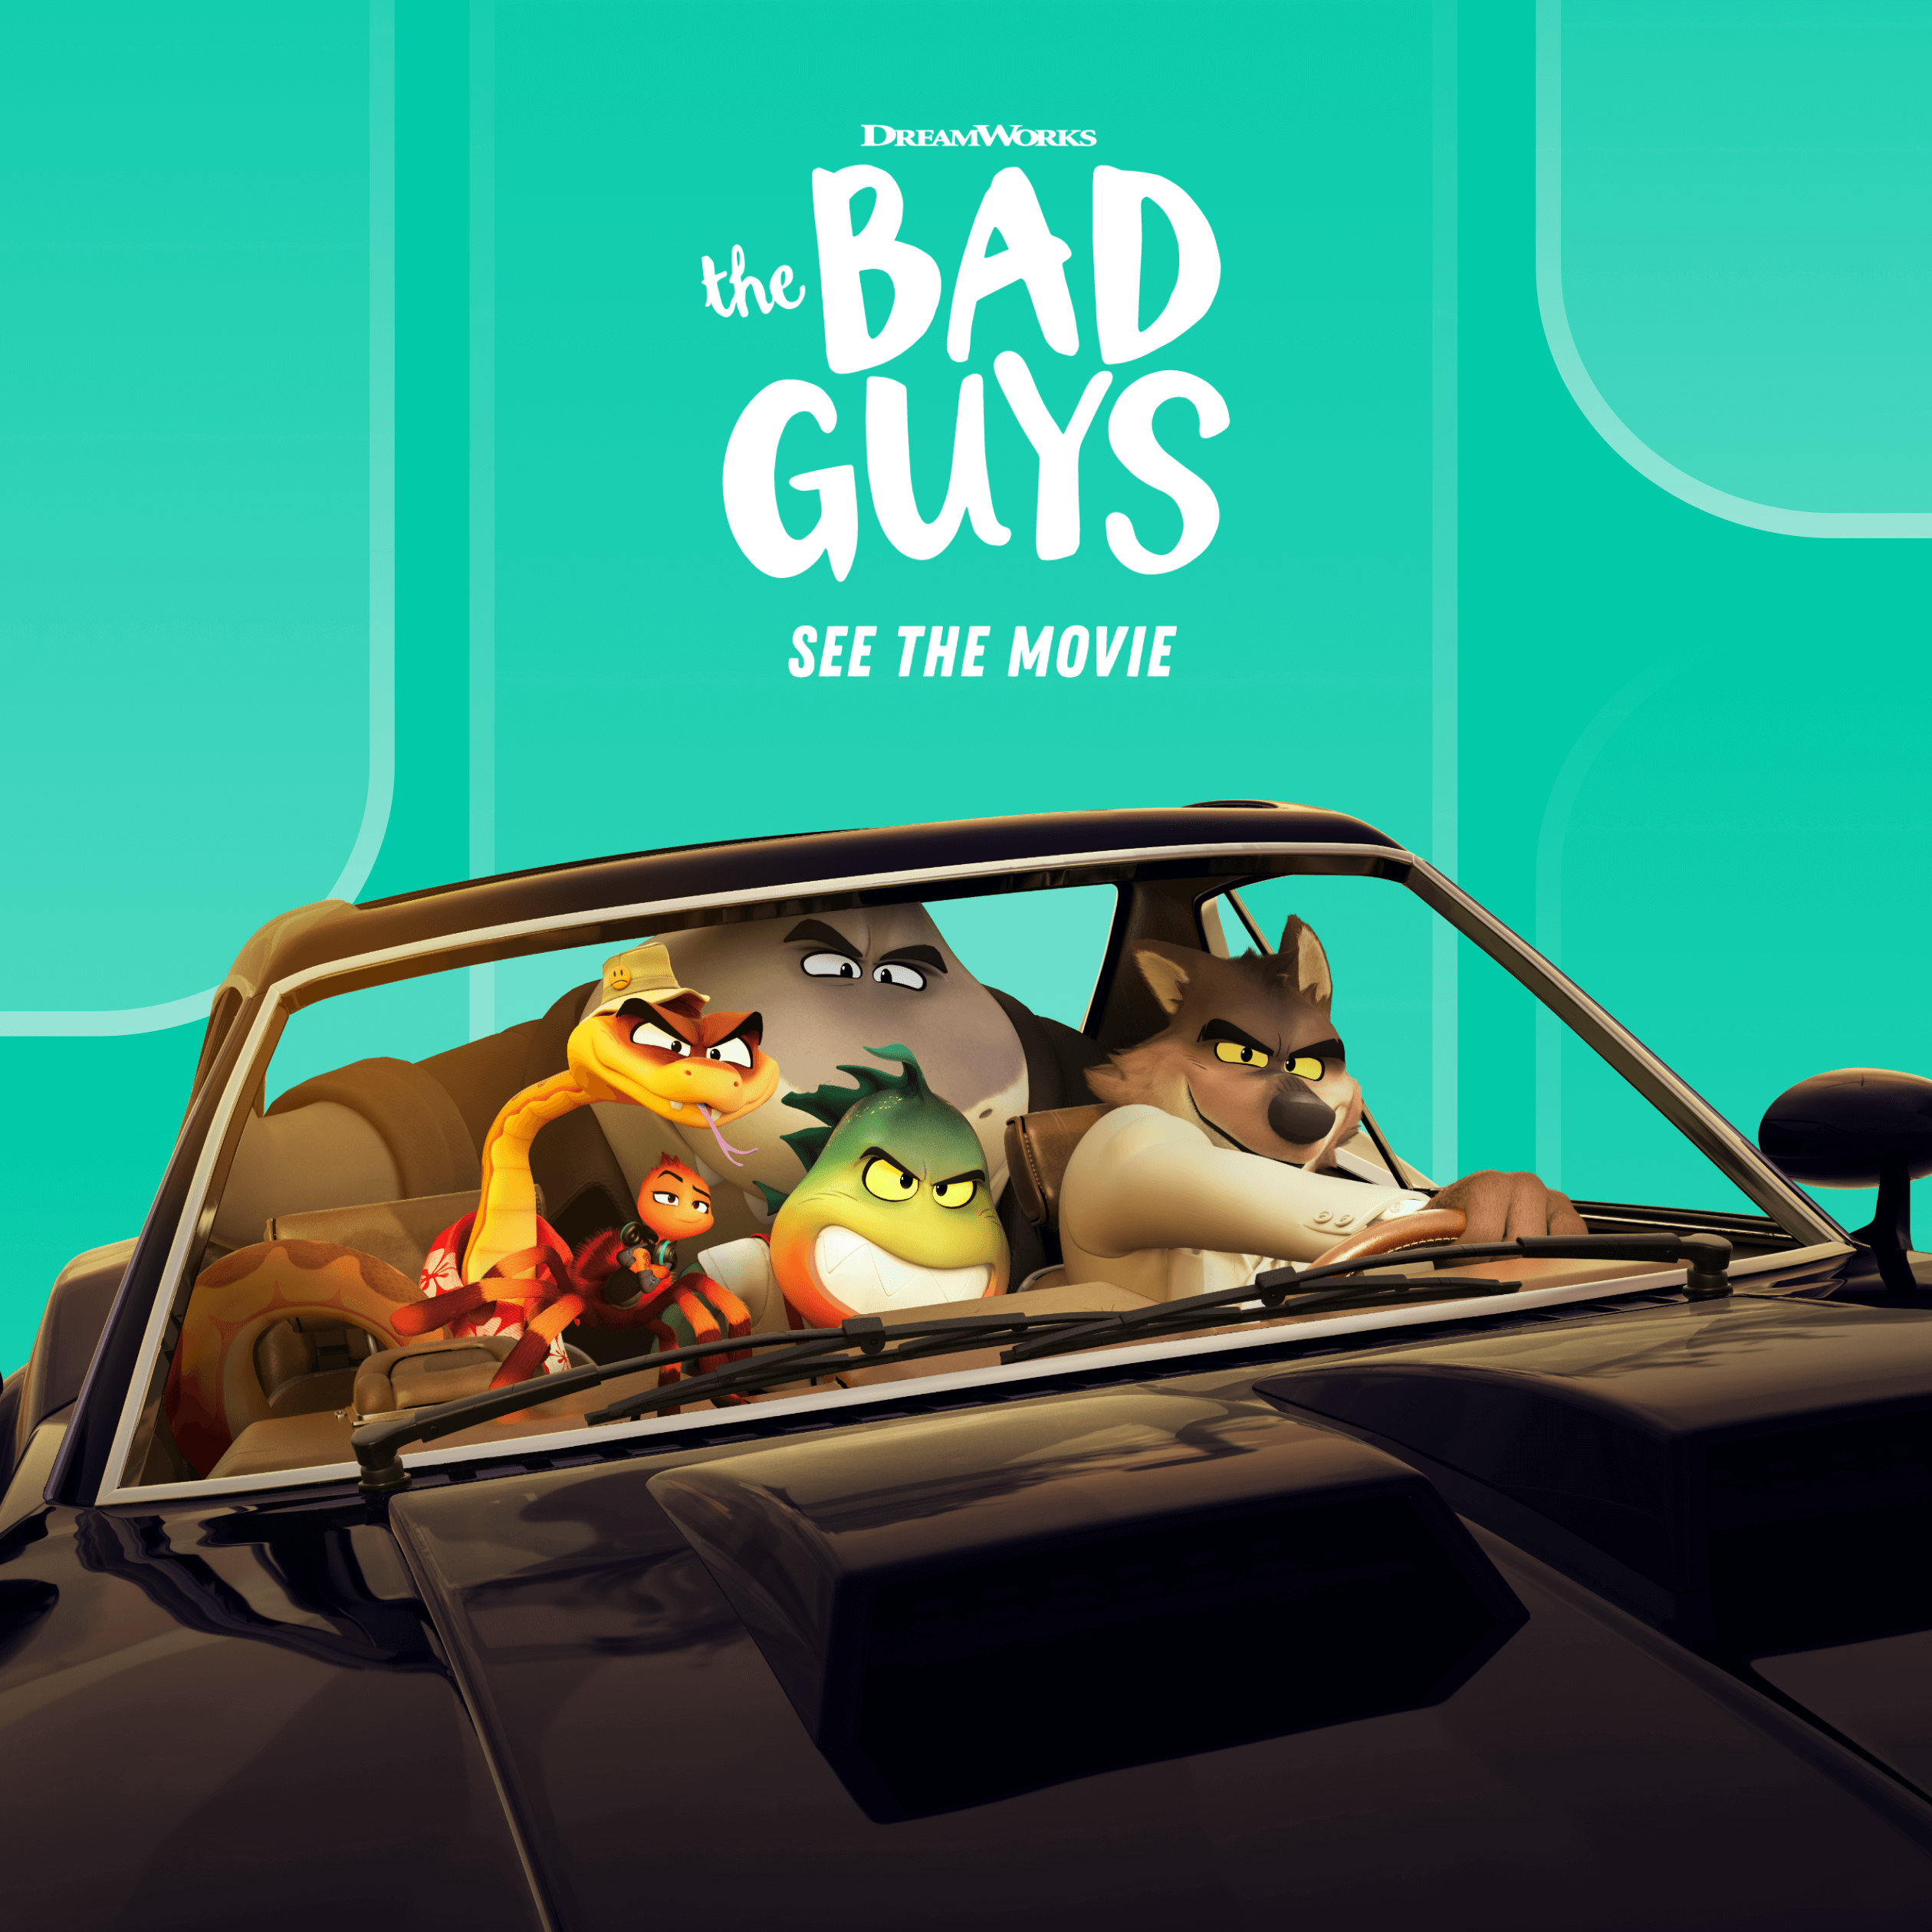 Bad Guys movie characters speeding in a car